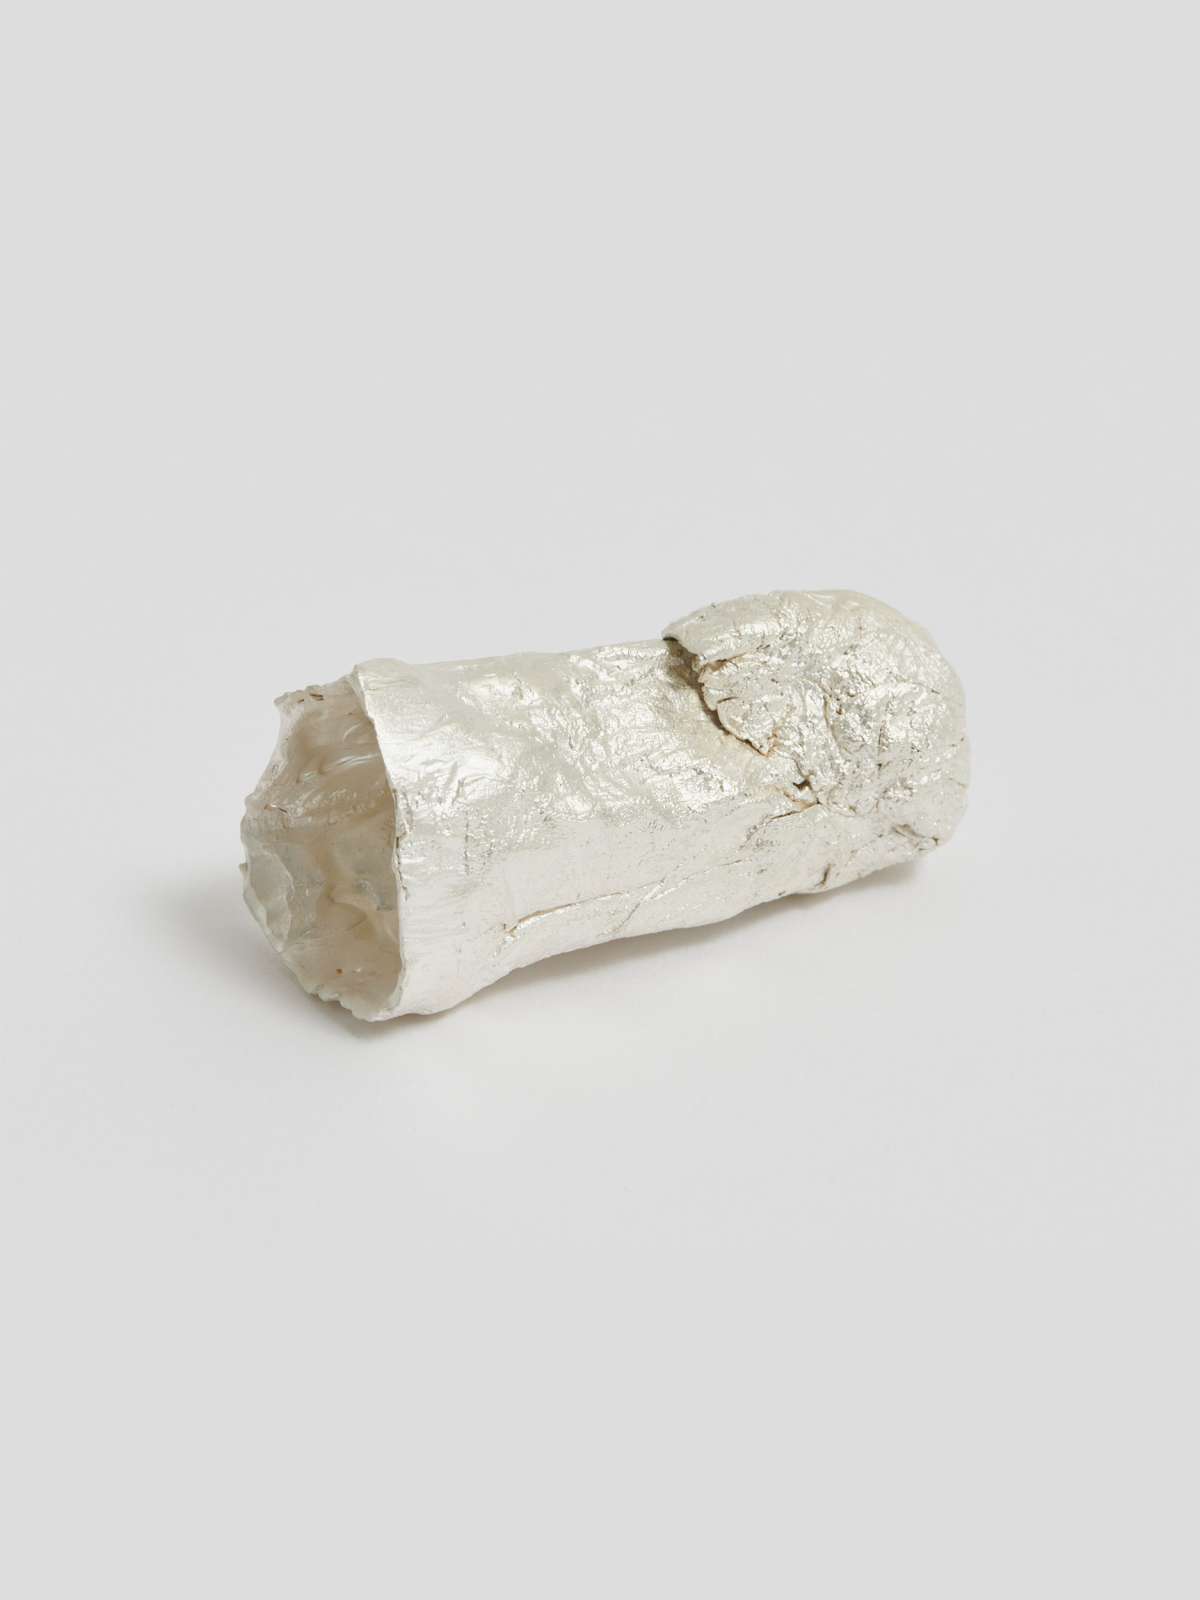 Amanda Moström, 'Teeny (1)', 2023. Silver-plated bronze, 3.5 x 3 x 4 cm. Courtesy the artist and Rose Easton, London. Photo by Theo Christelis.